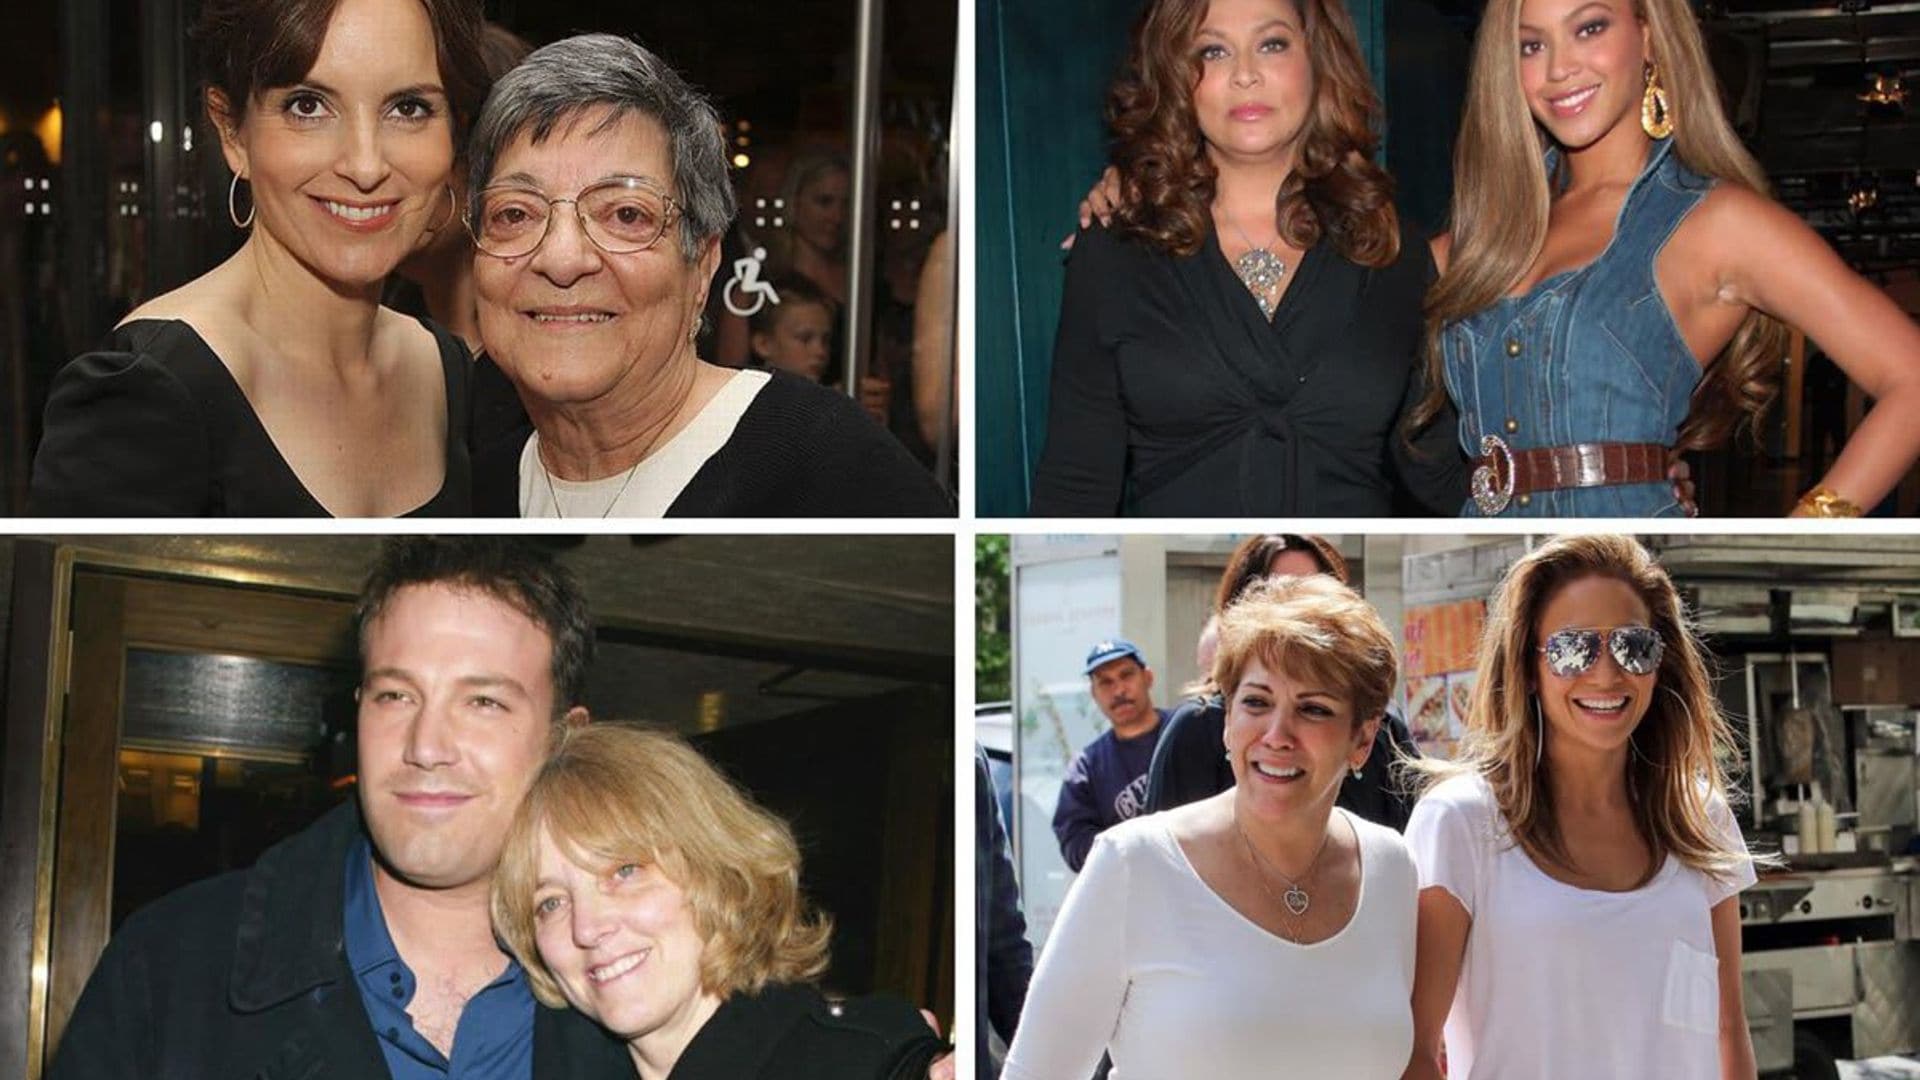 Celebrity moms that have cooler names than their famous offspring